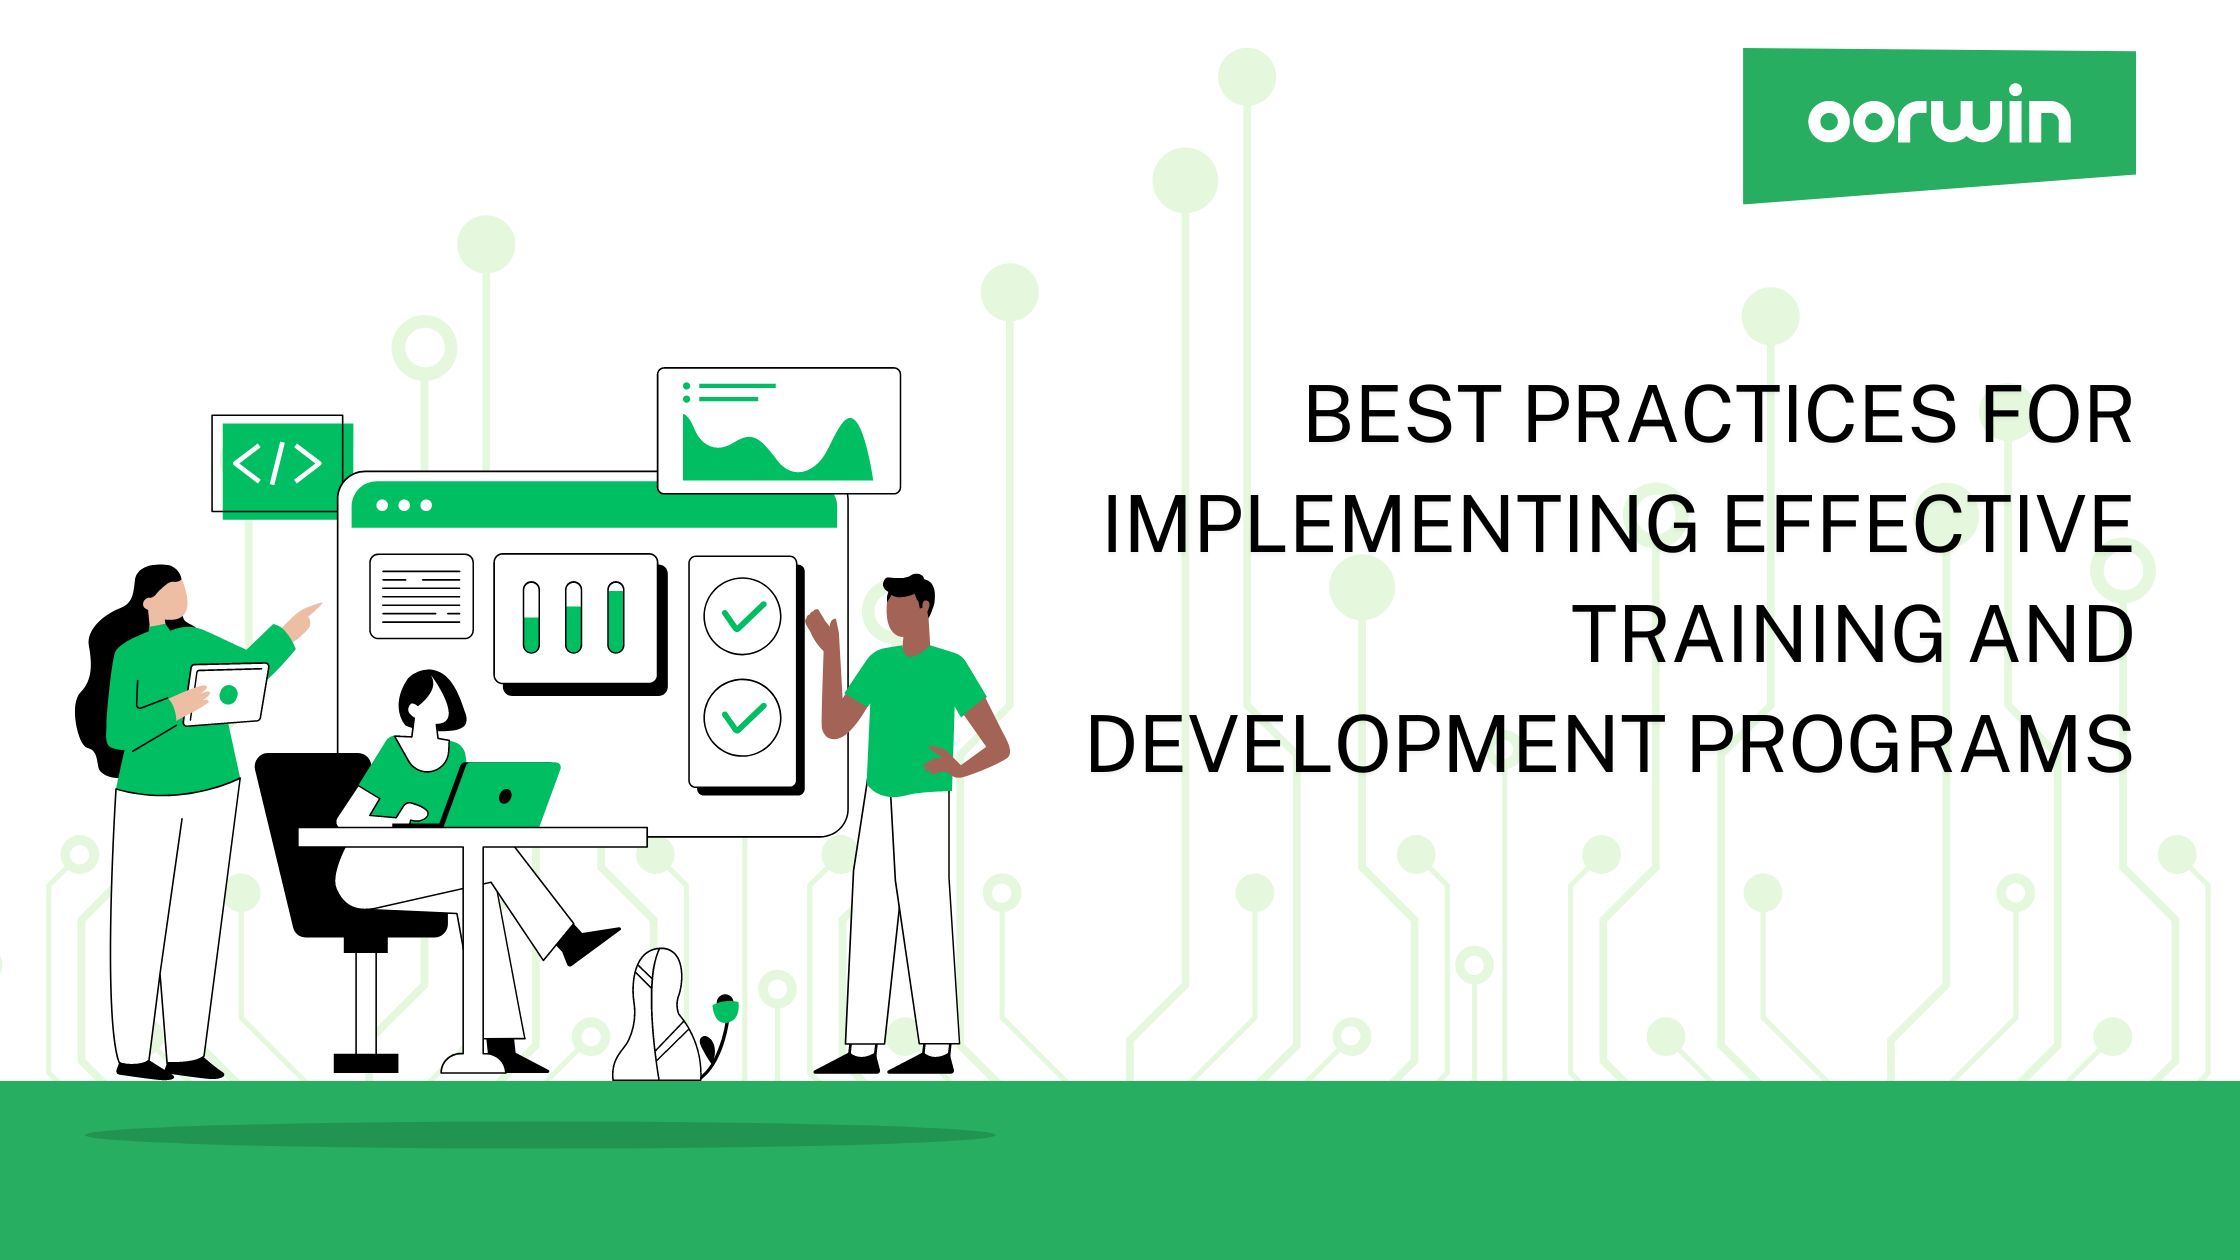 Best Practices for Effective Training and Development Programs